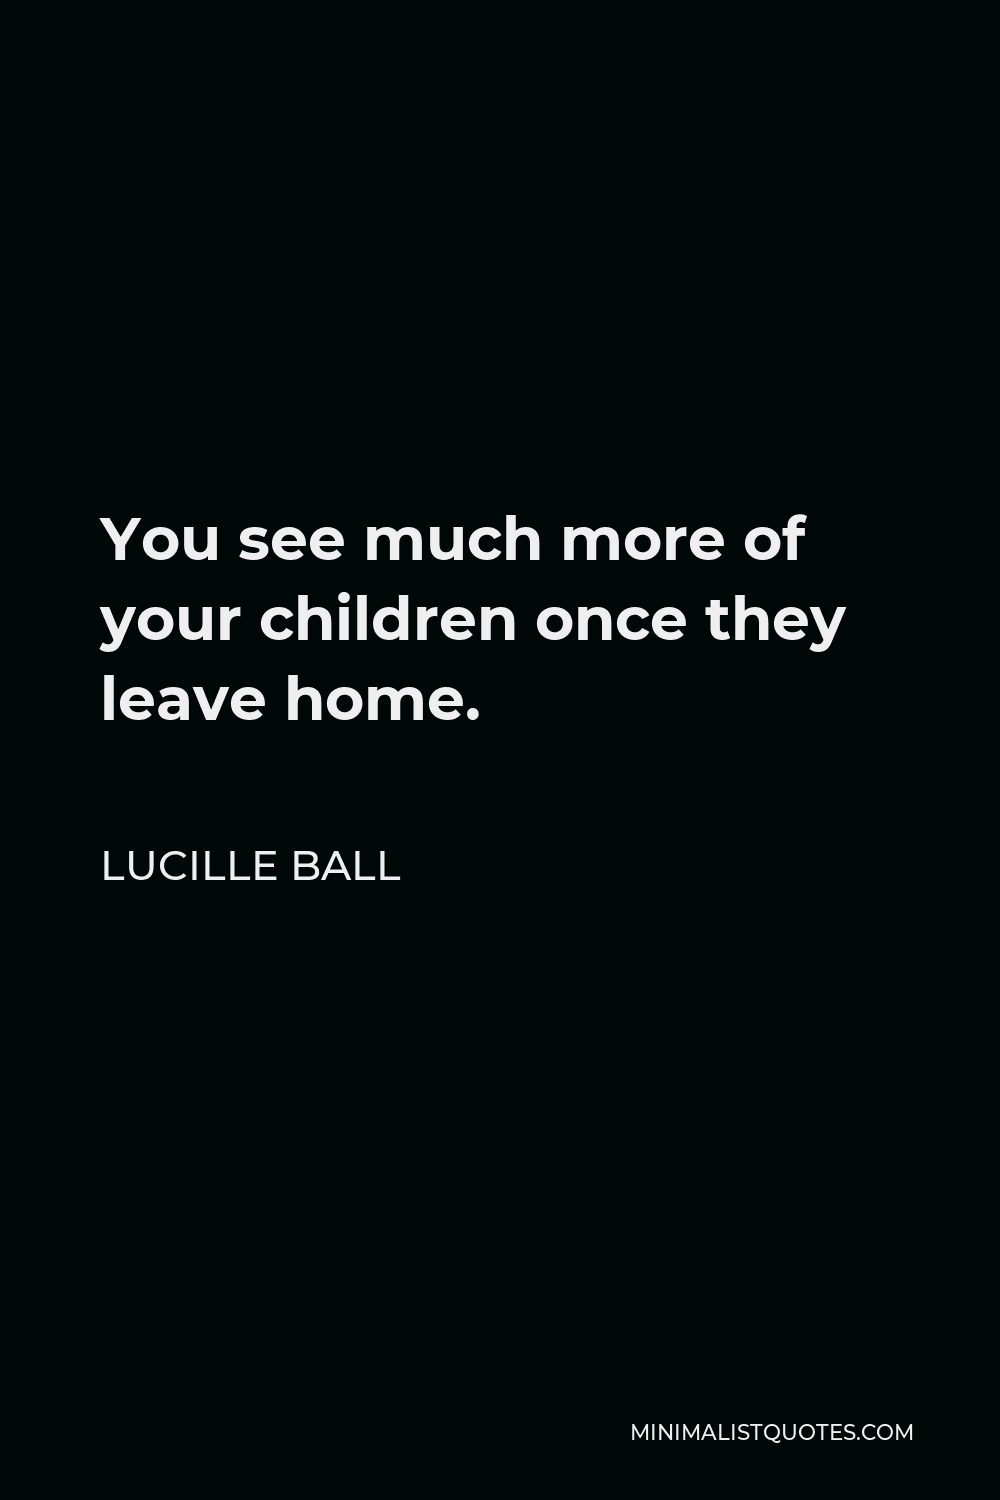 Lucille Ball Quote - You see much more of your children once they leave home.